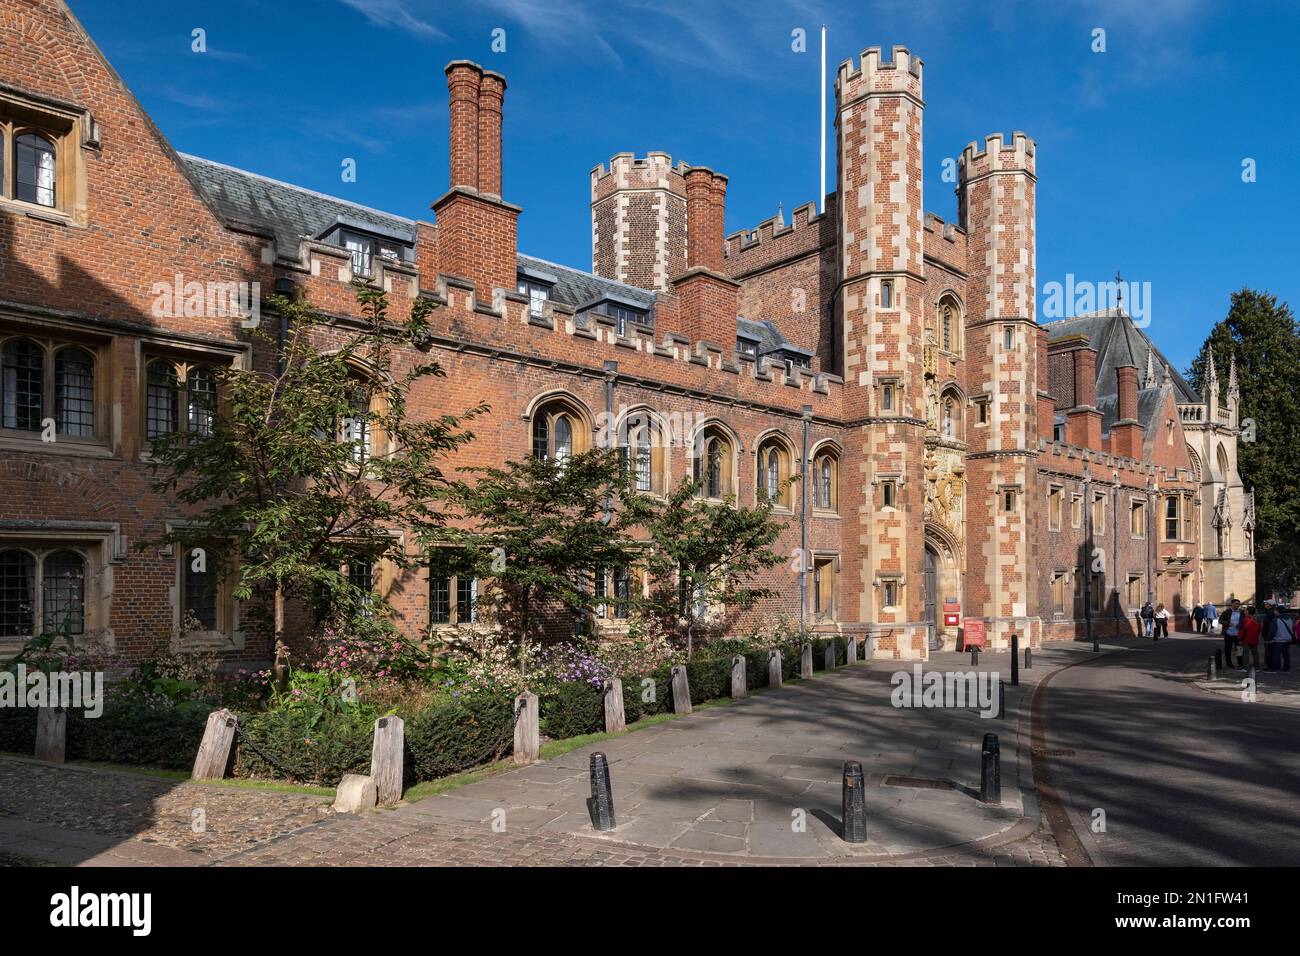 St. John's College and the Great Gate, Trinity Street, Cambridge, Cambridgeshire, Angleterre, Royaume-Uni, Europe Banque D'Images